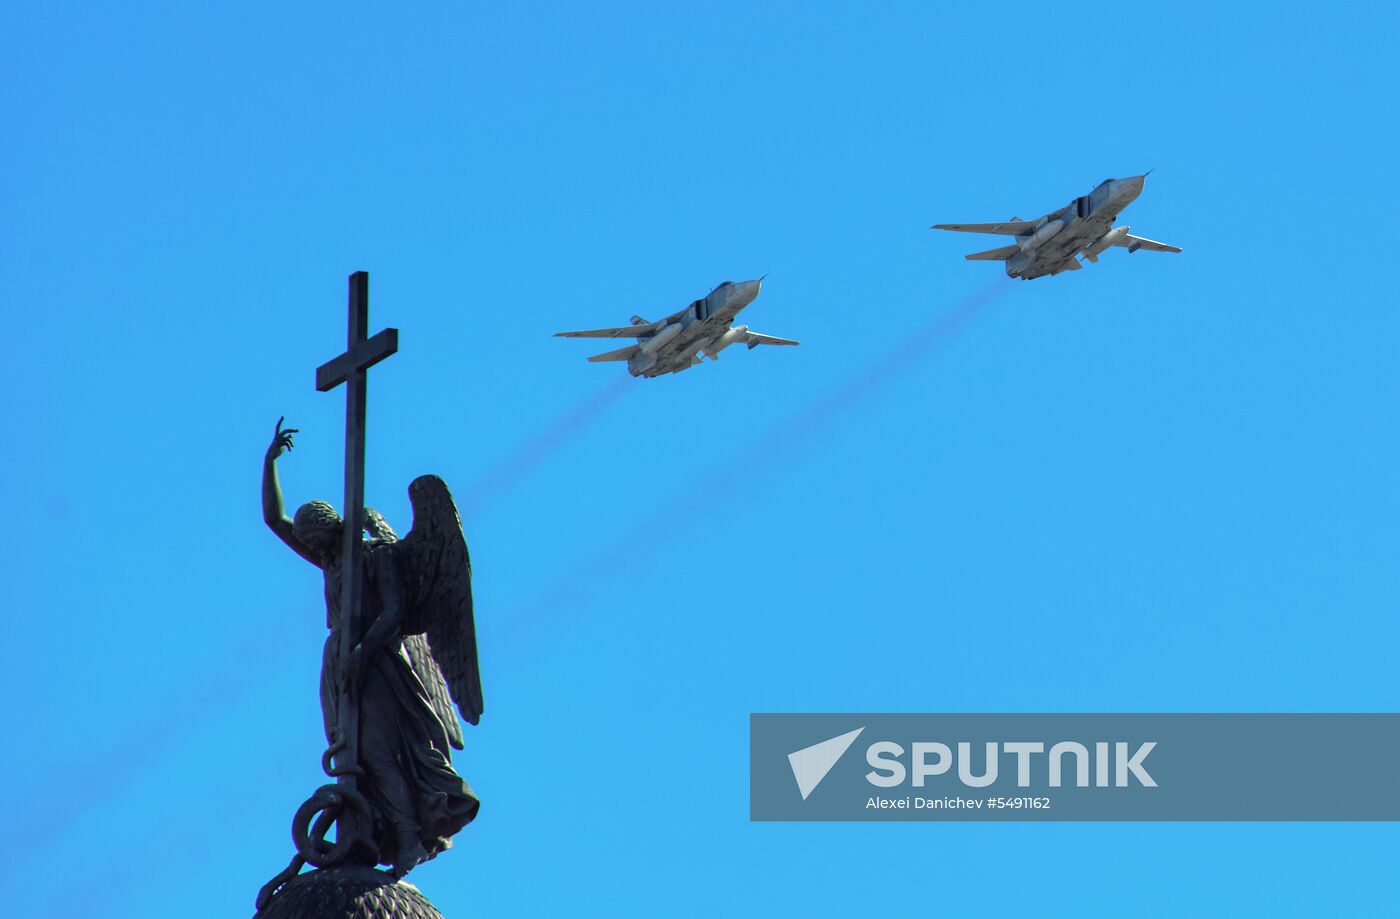 Final rehearsal of Victory Day Parade in St. Petersburg